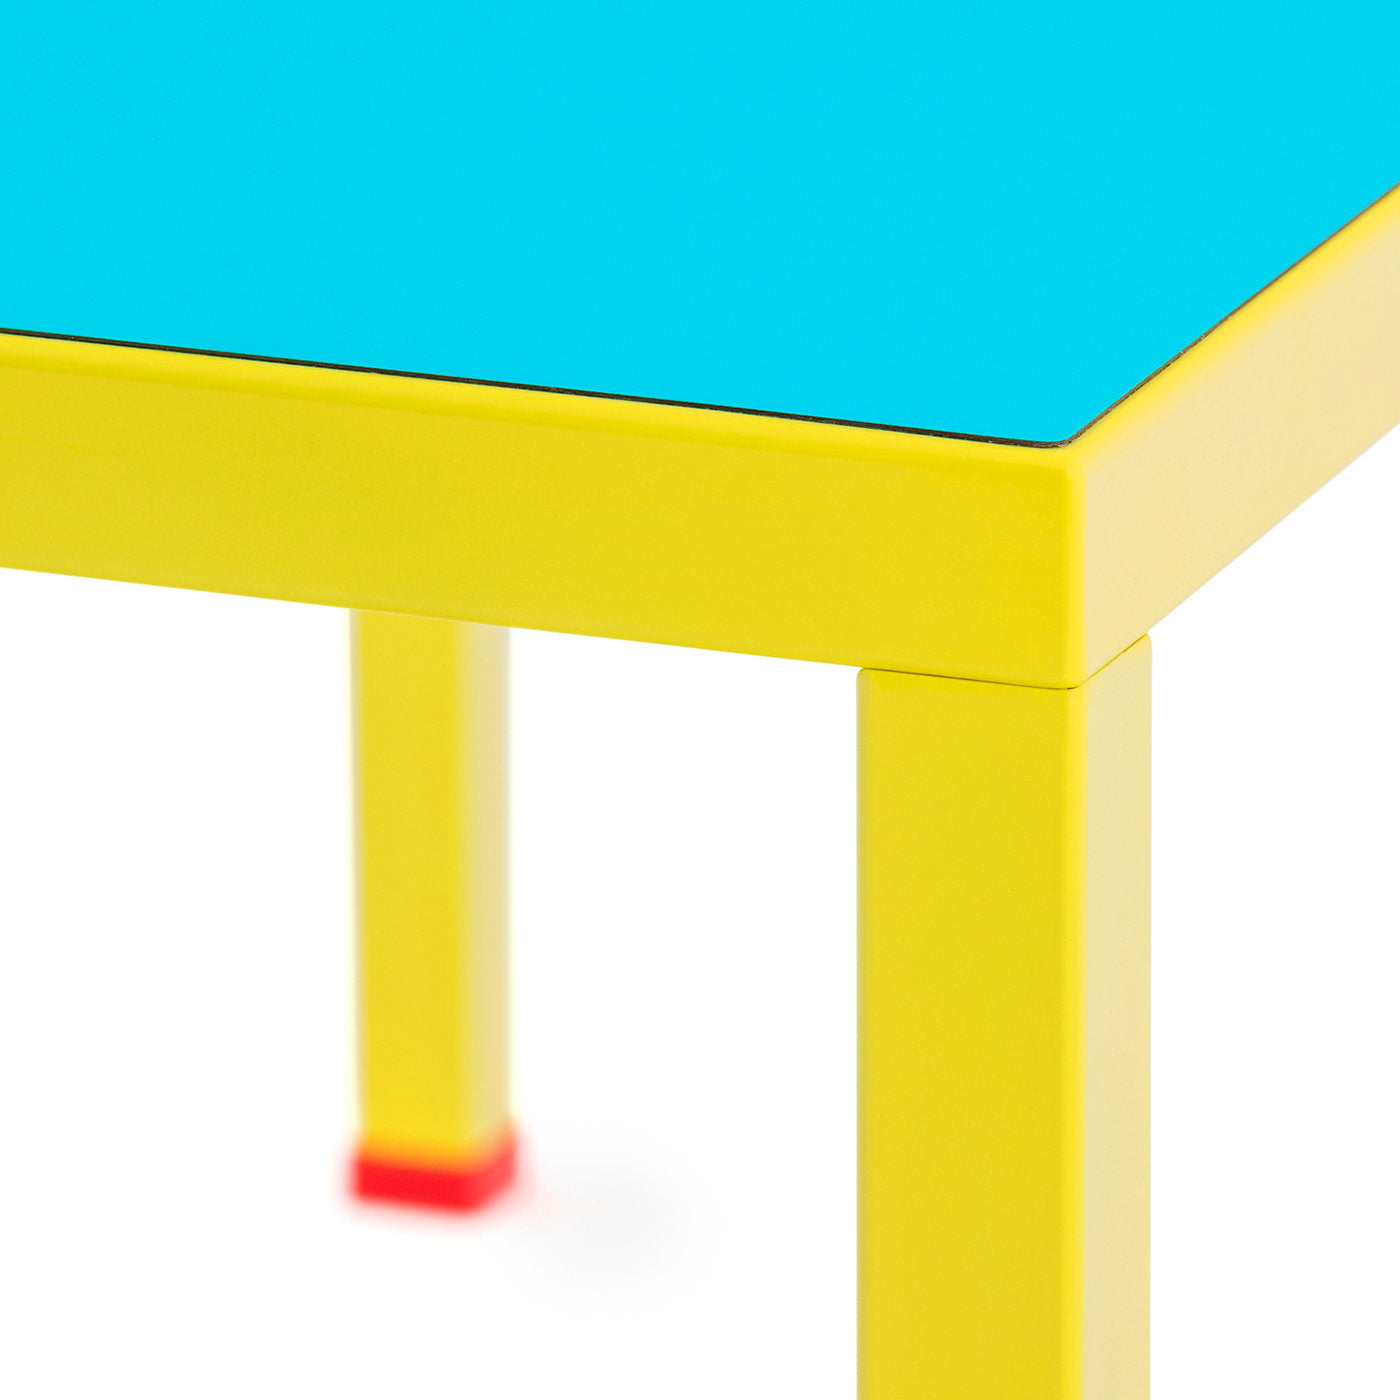 Violetta Small Table by George Sowden - Post Design - Alternative view 1